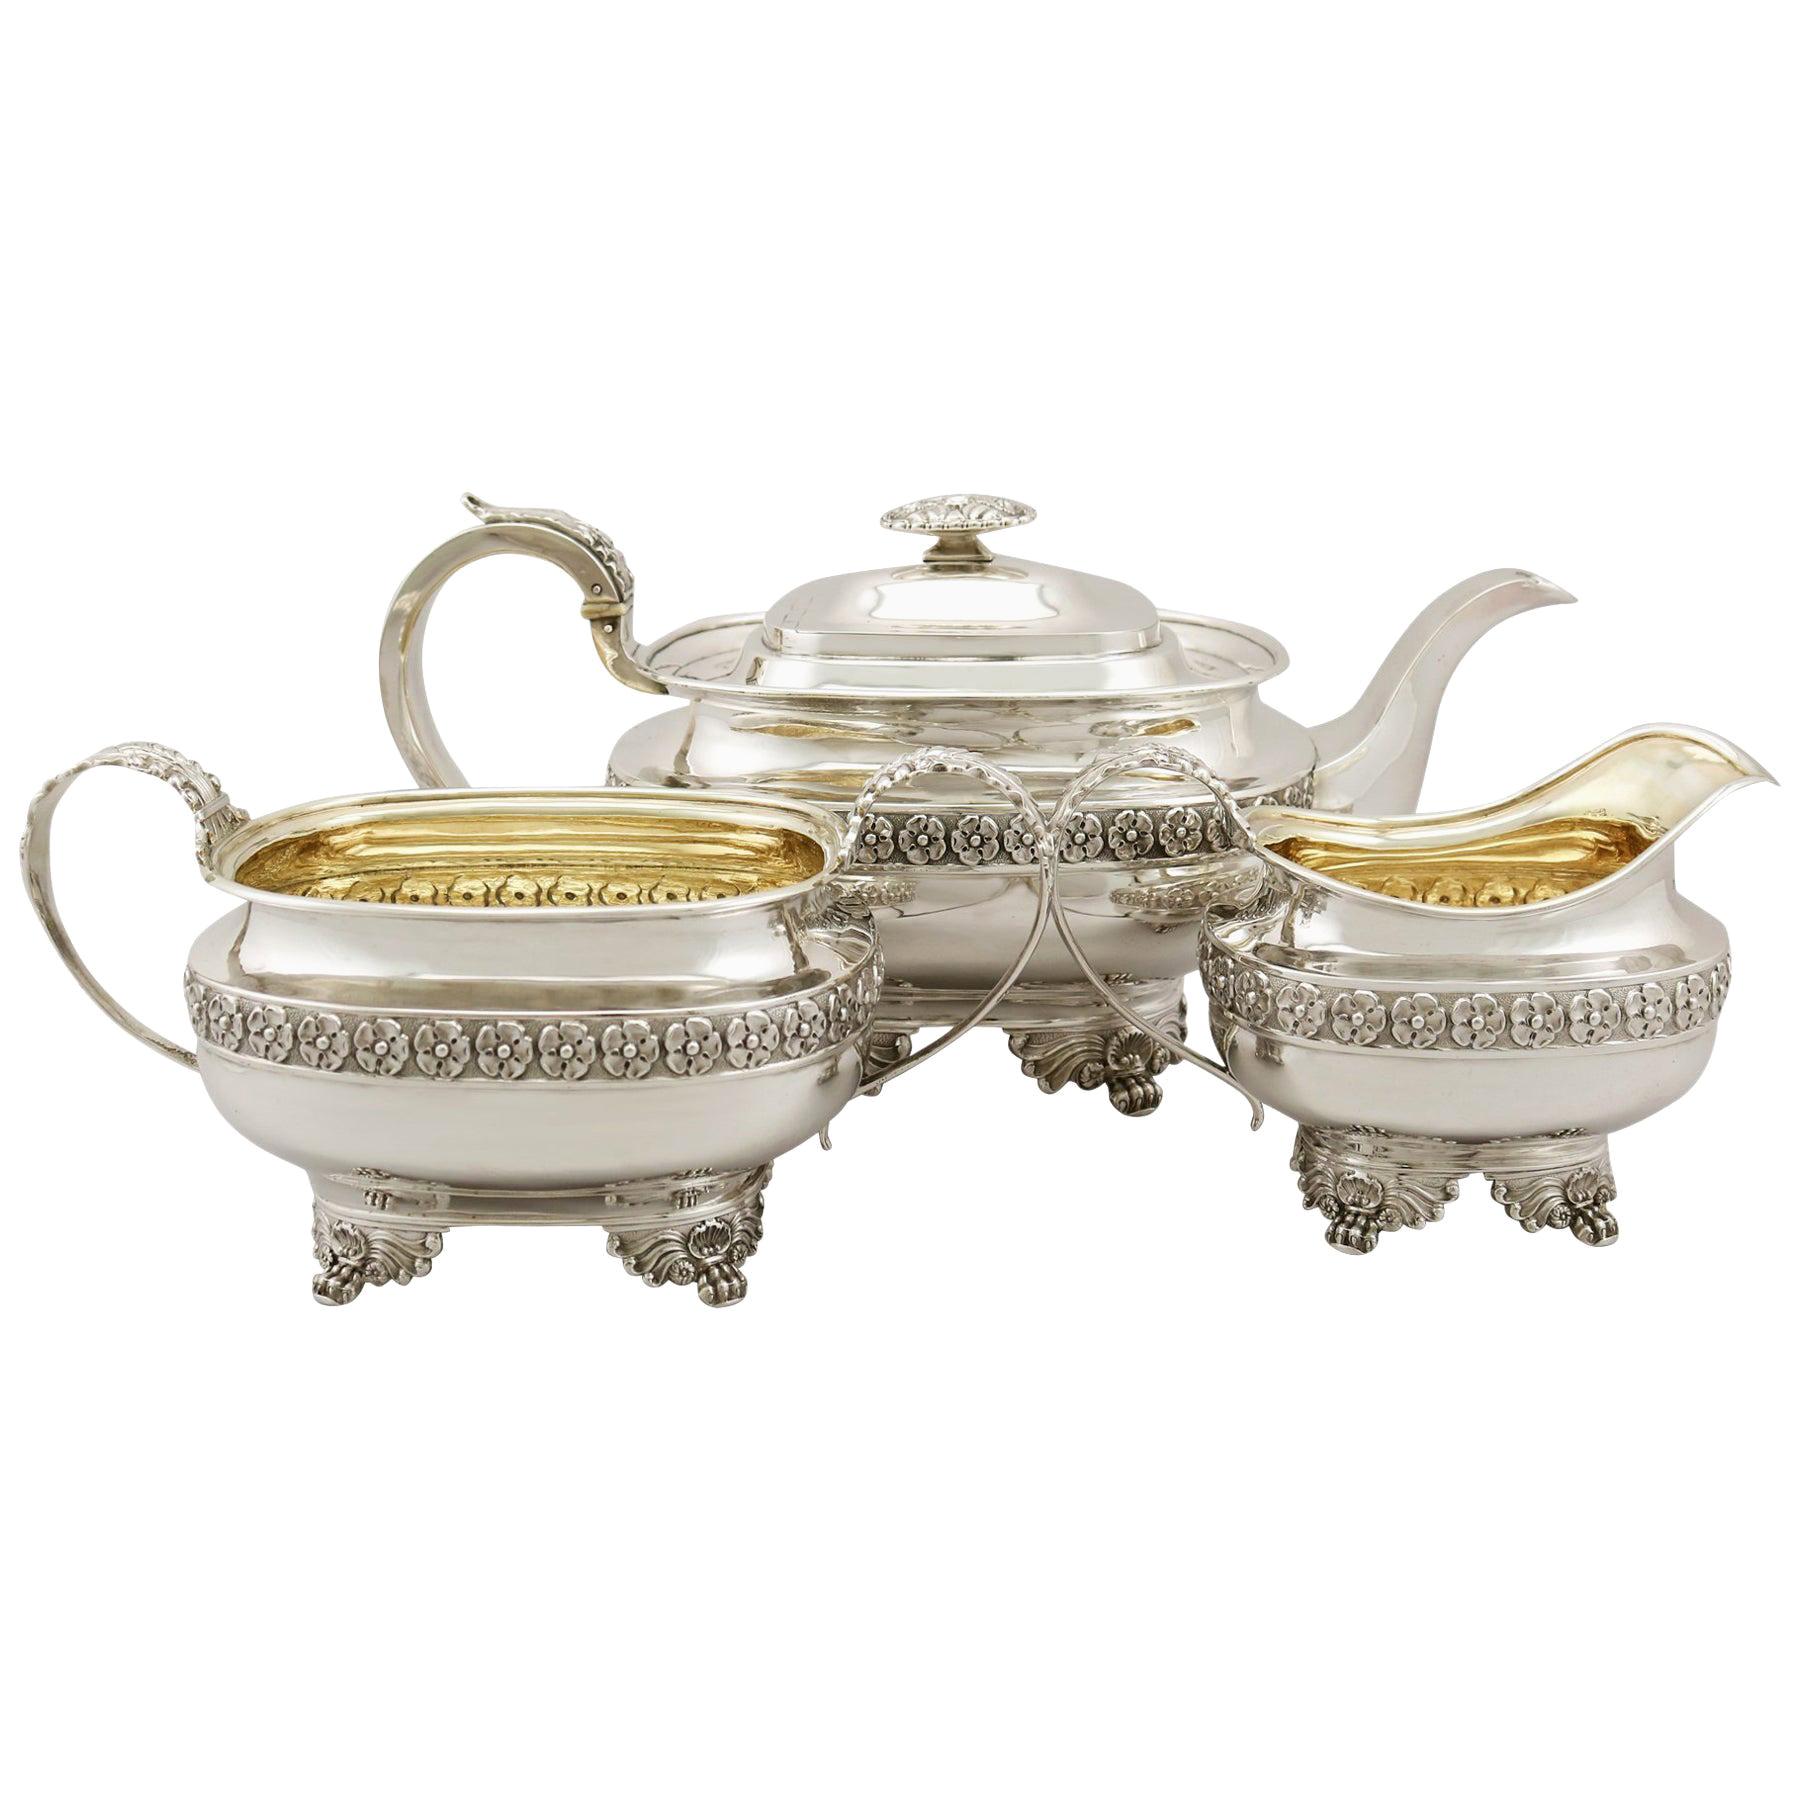 Antique George IV Sterling Silver Three-Piece Tea Service in the Regency Style